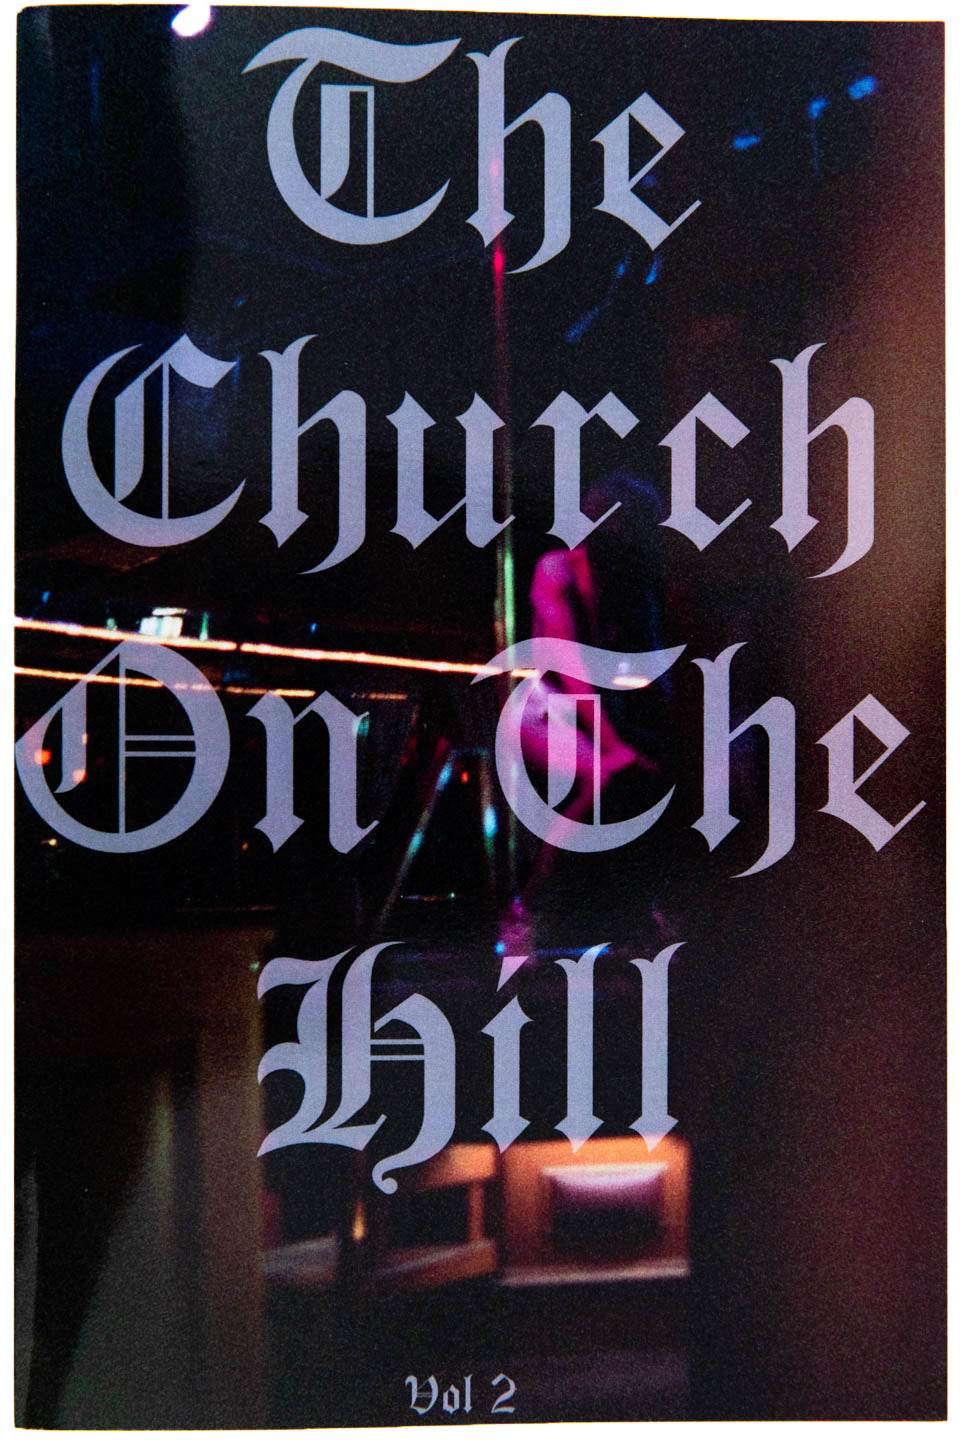 THE CURCH ON THE HILL Vol. 2